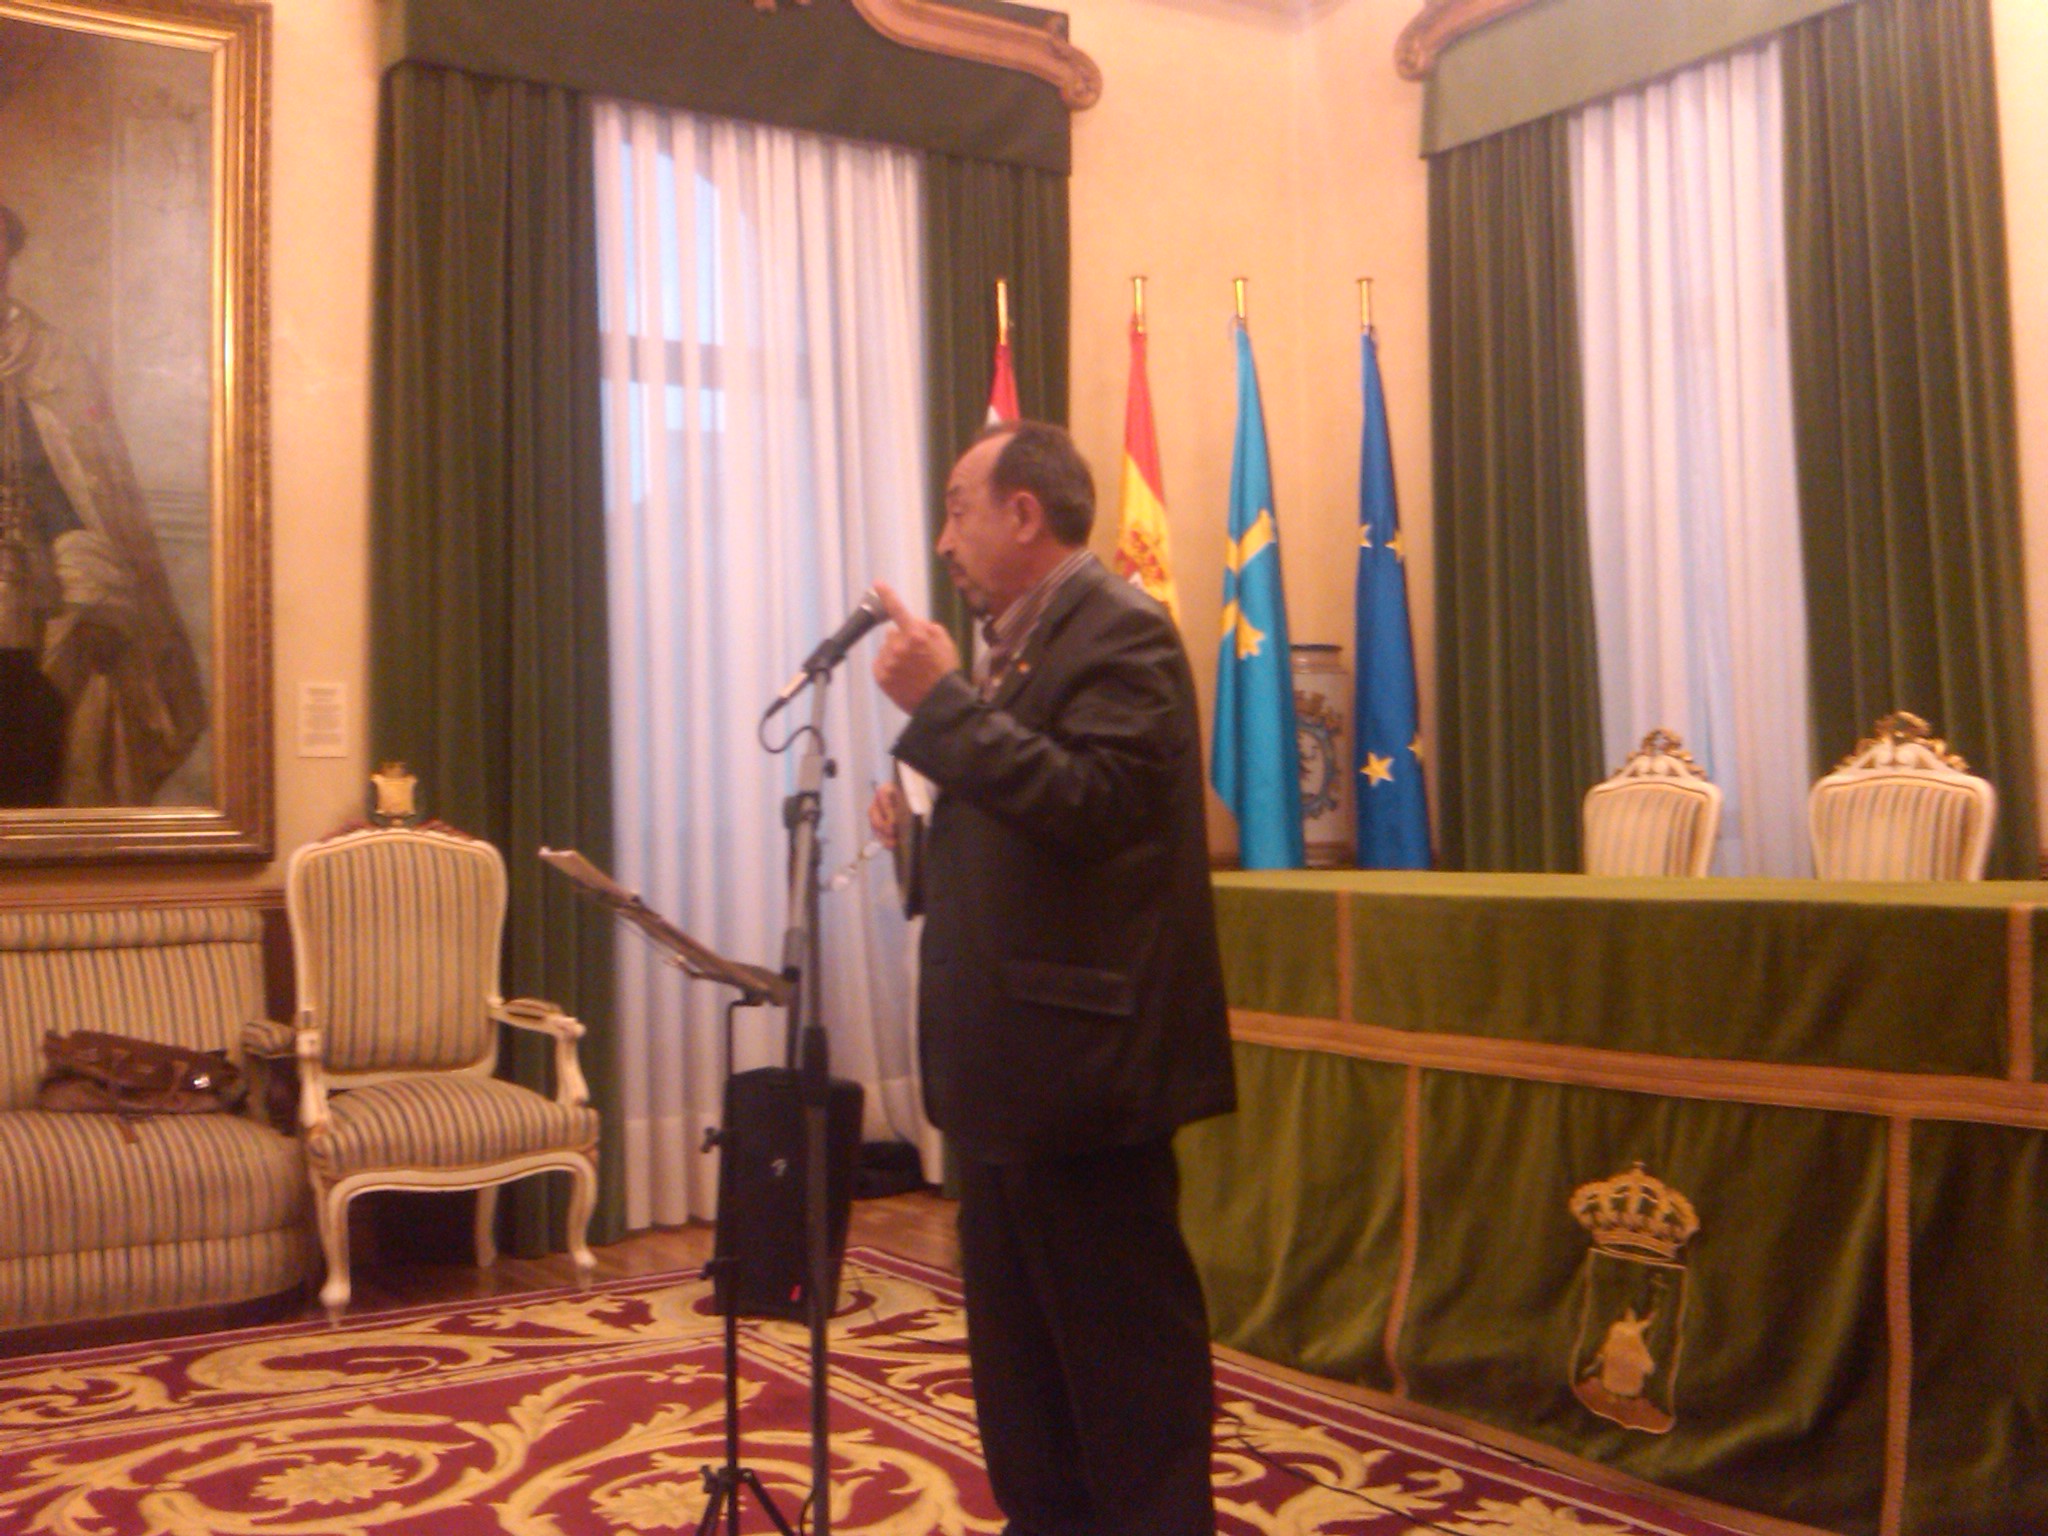 man in suit giving speech next to flags